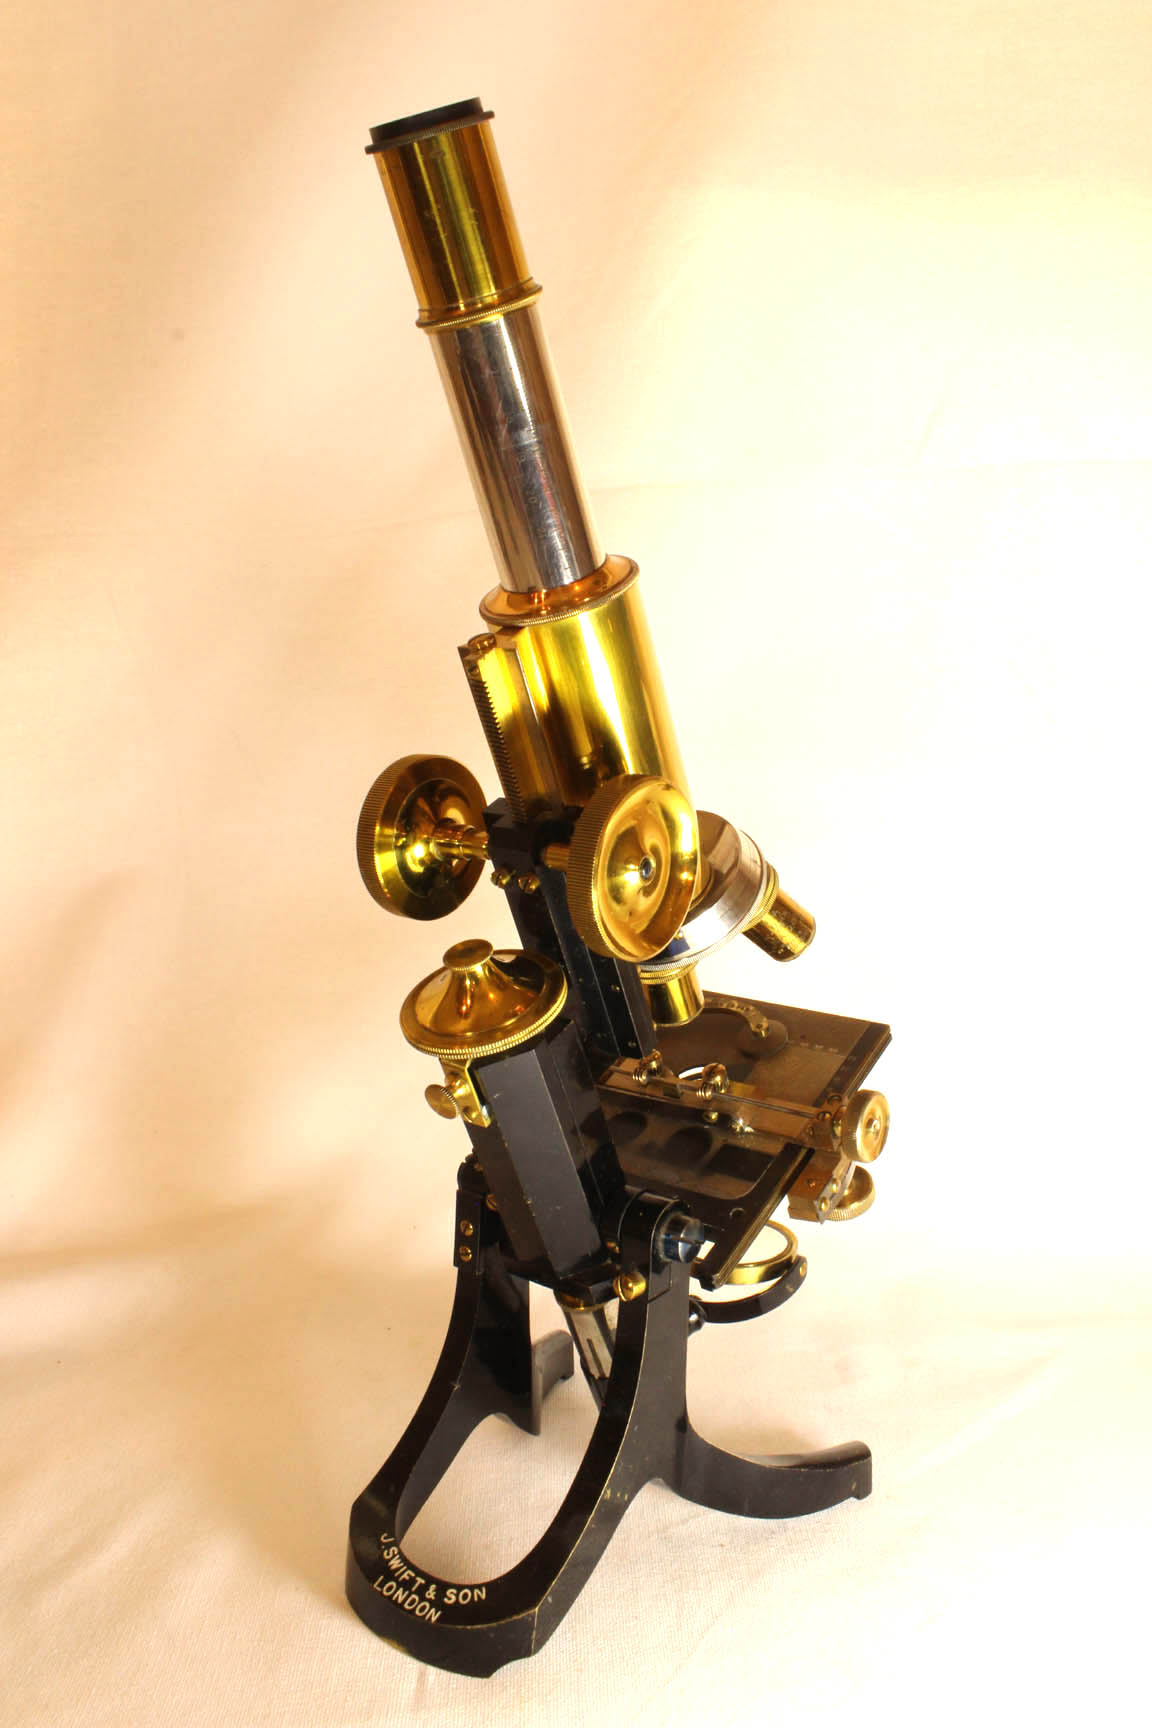 Swift & Son Bacteriological Microscope